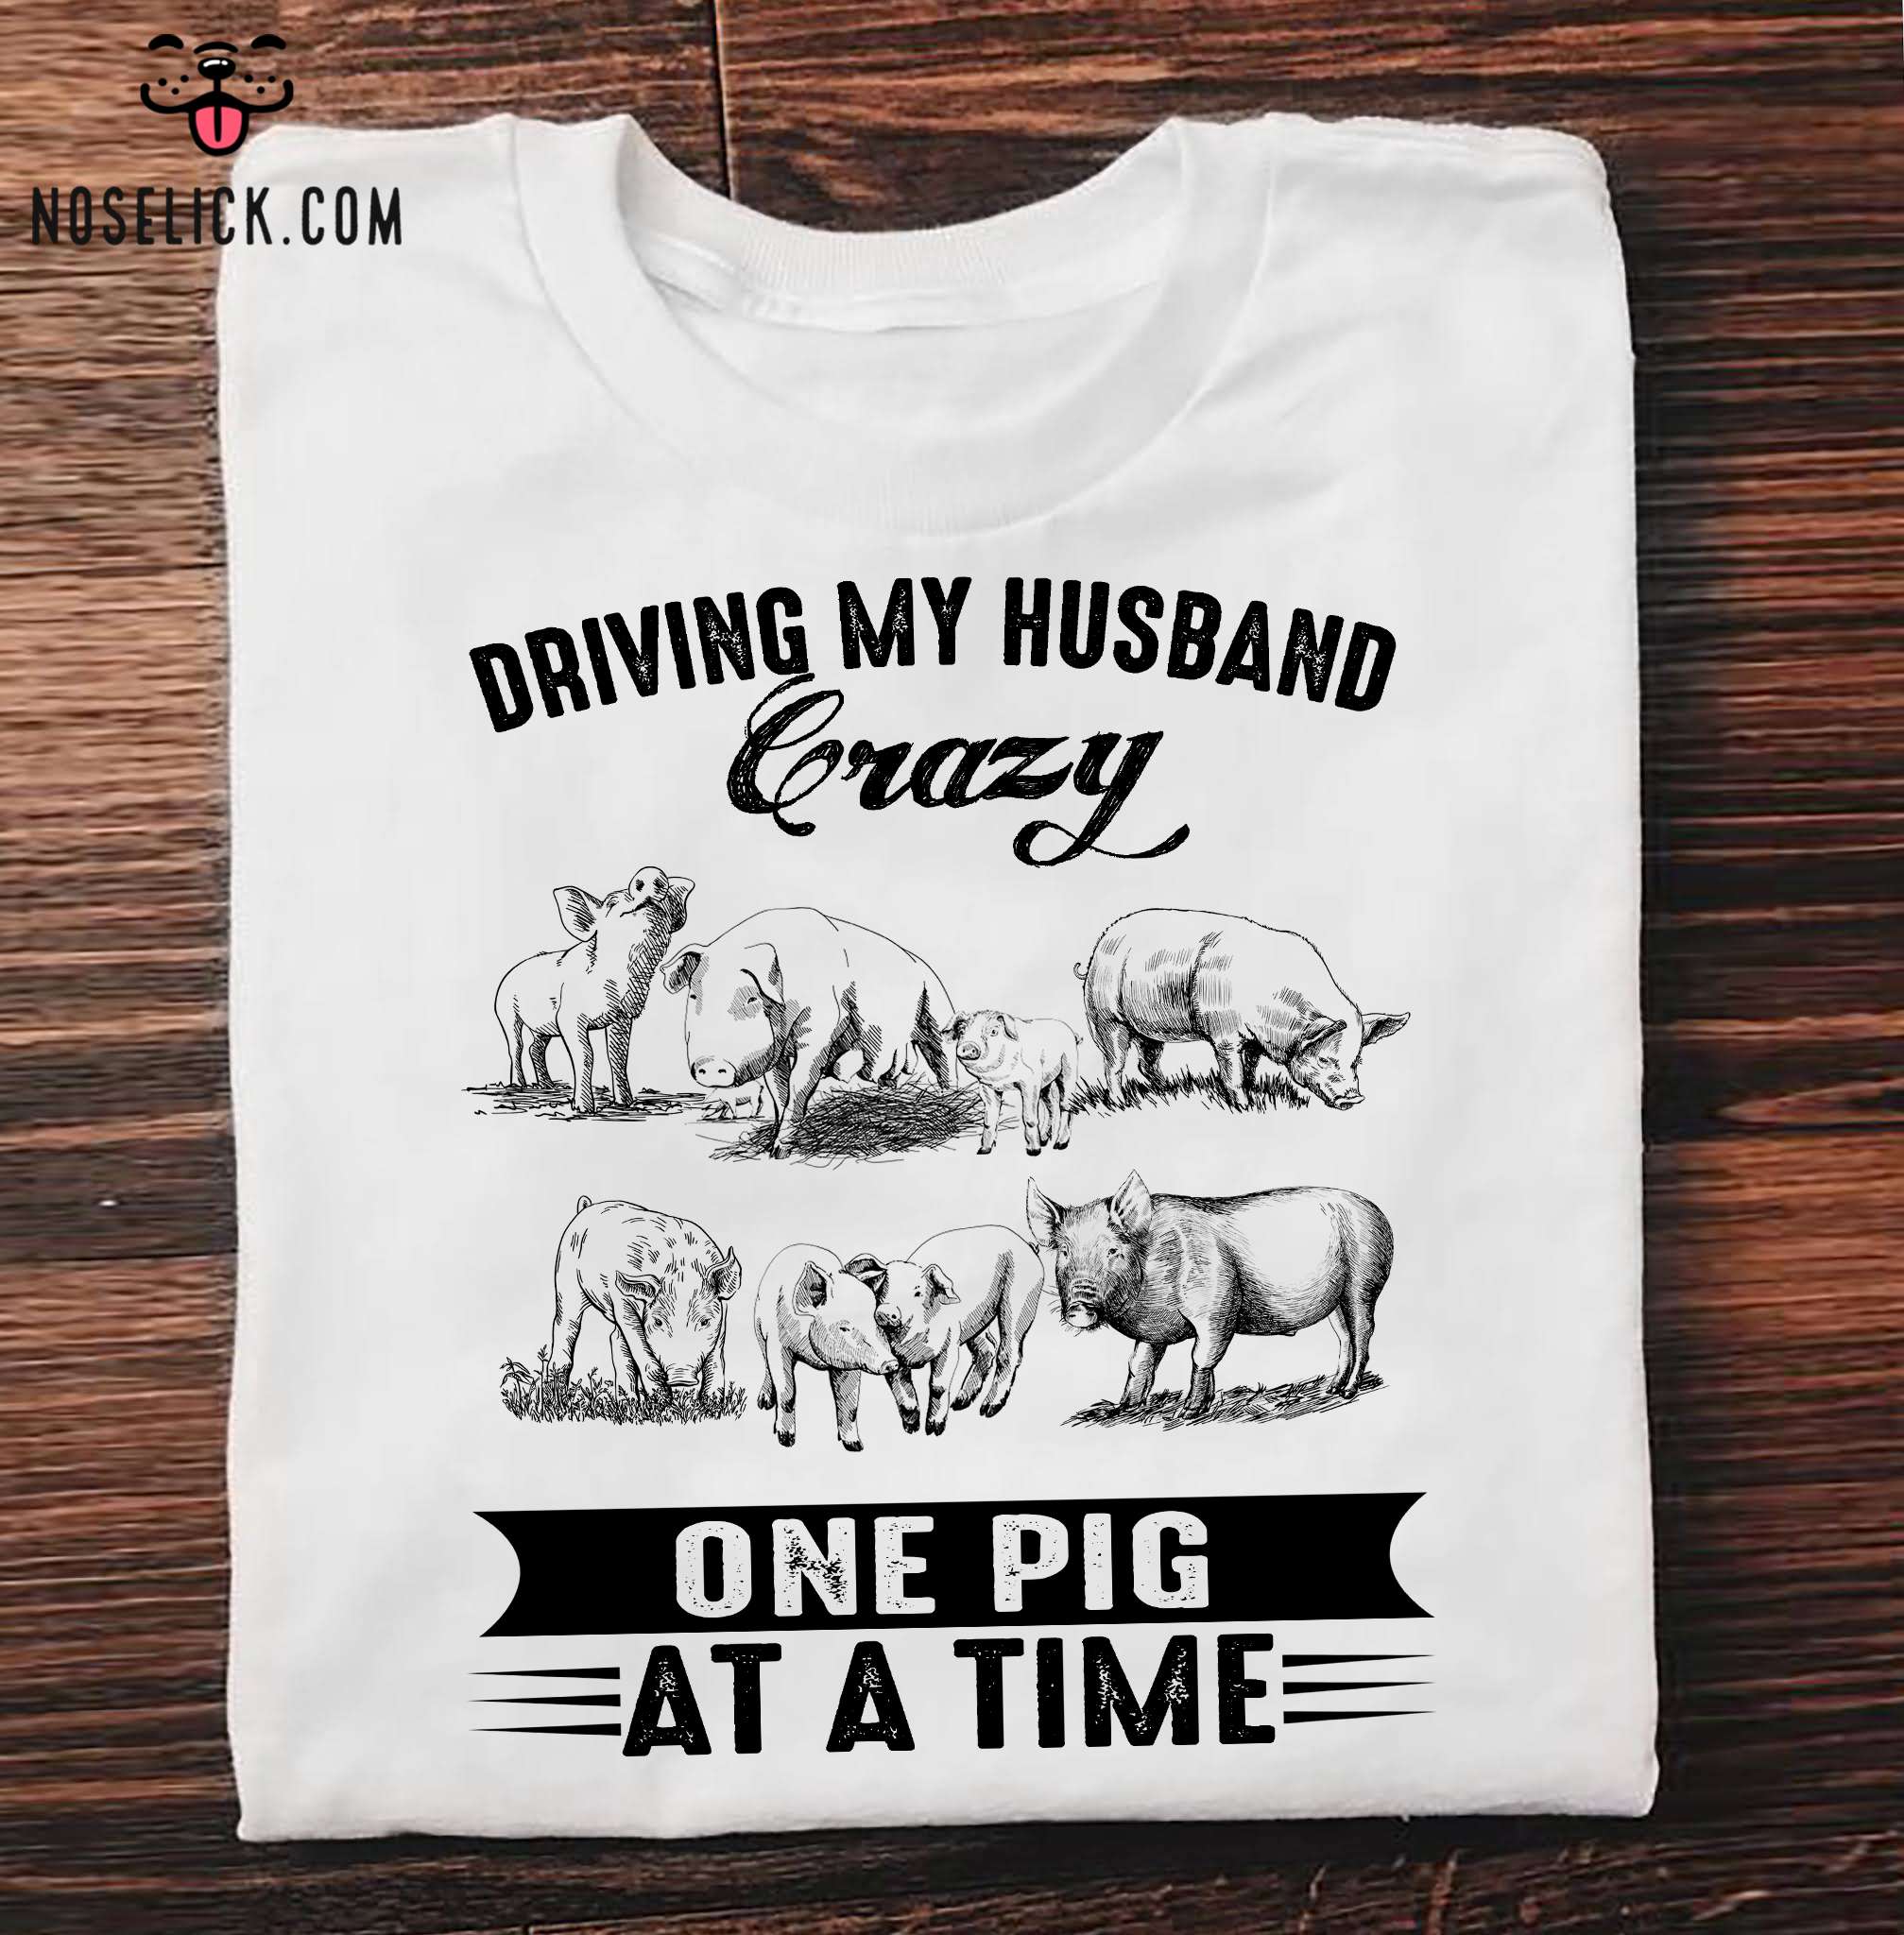 Driving my husband crazy, one pig at a time - Husband loves pig